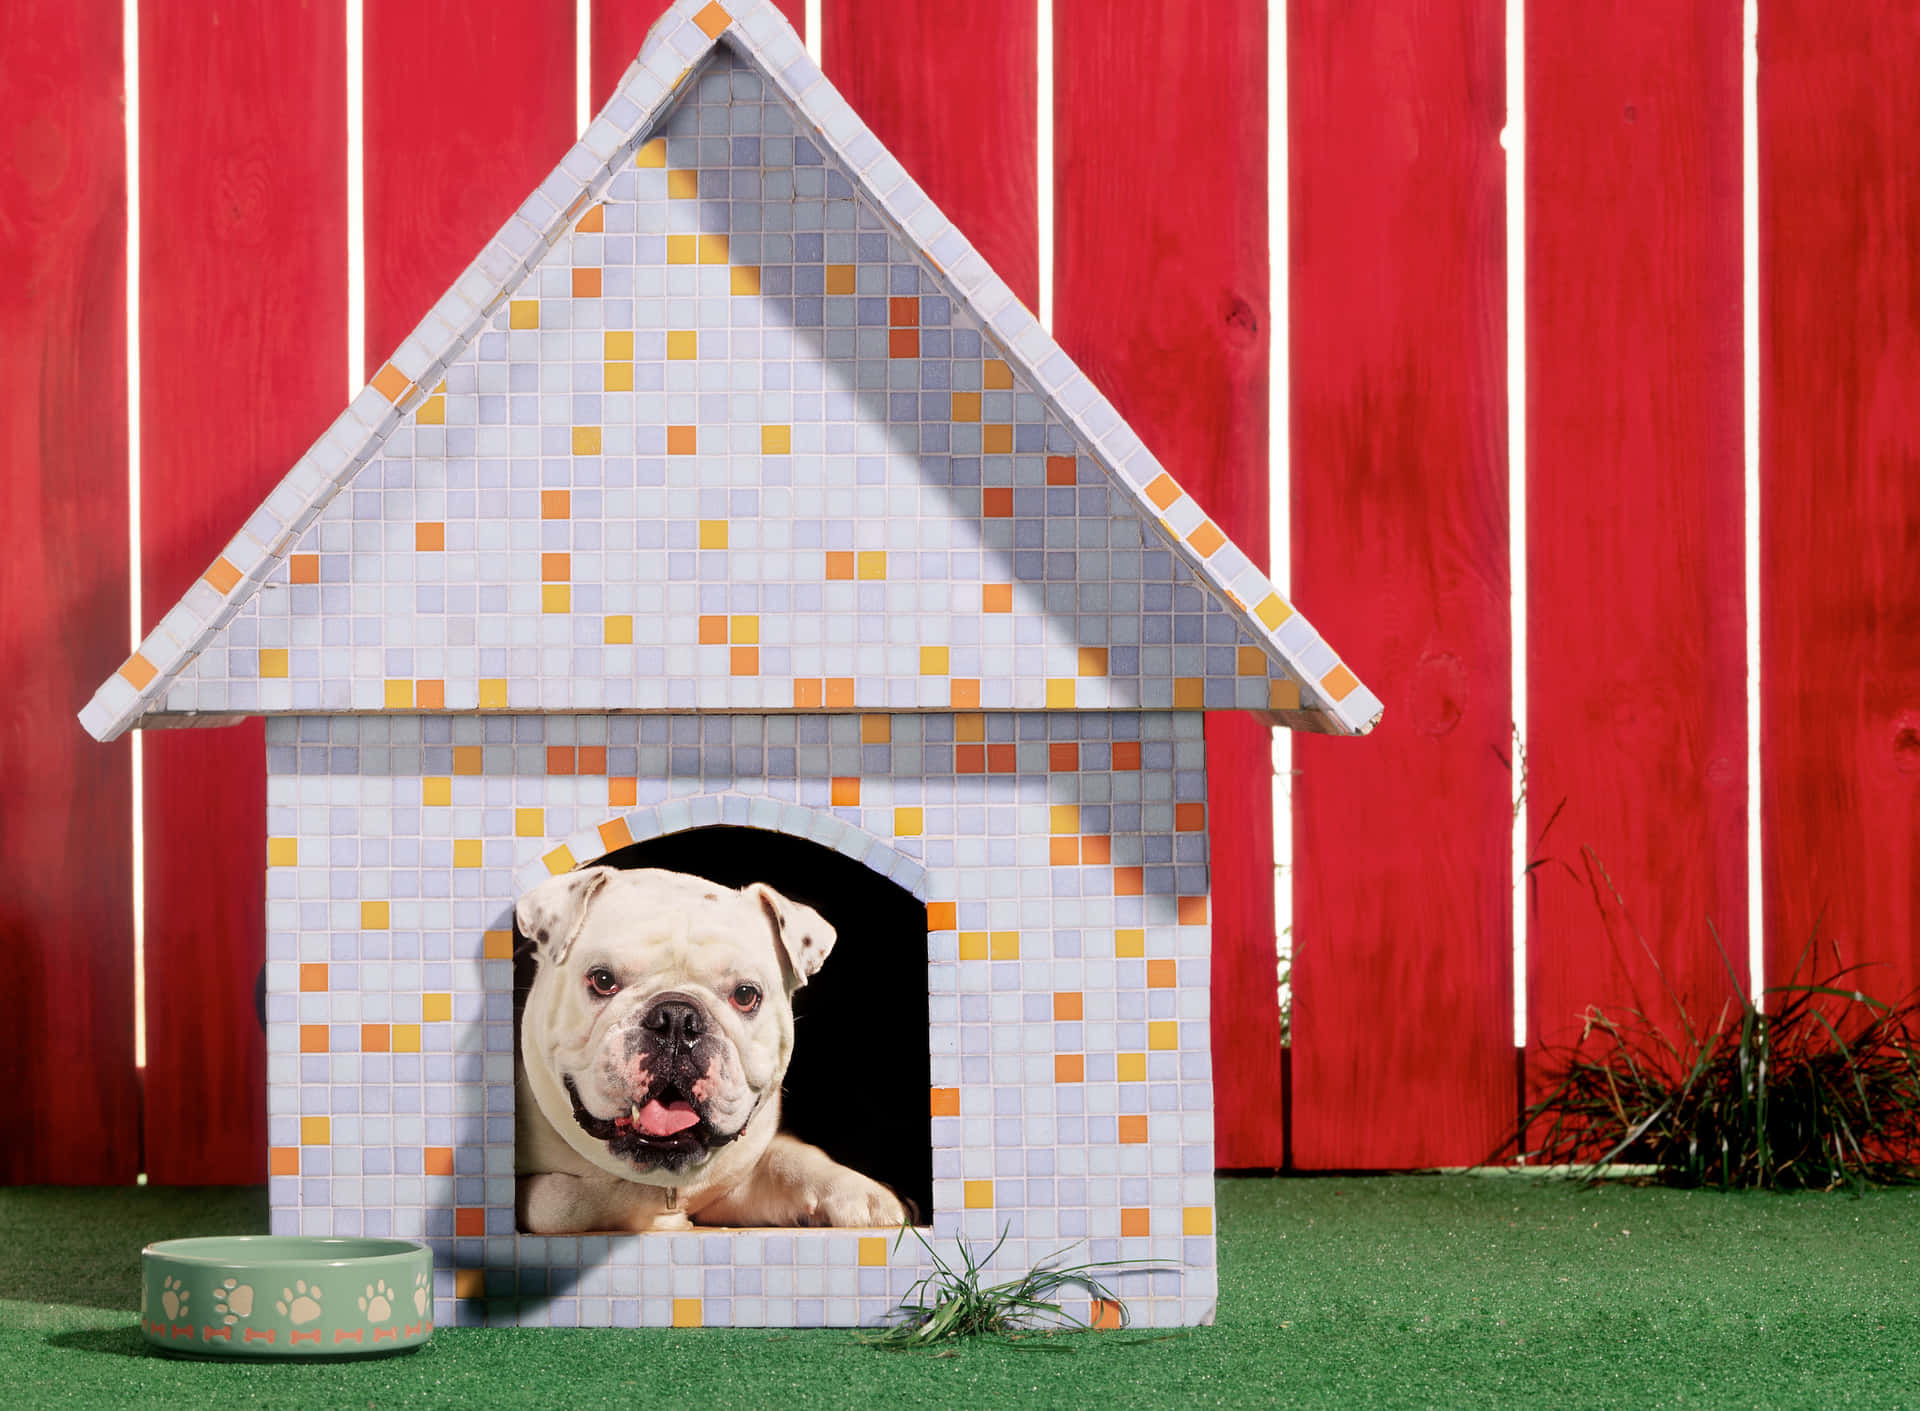 Pixelated Dog House Pictures